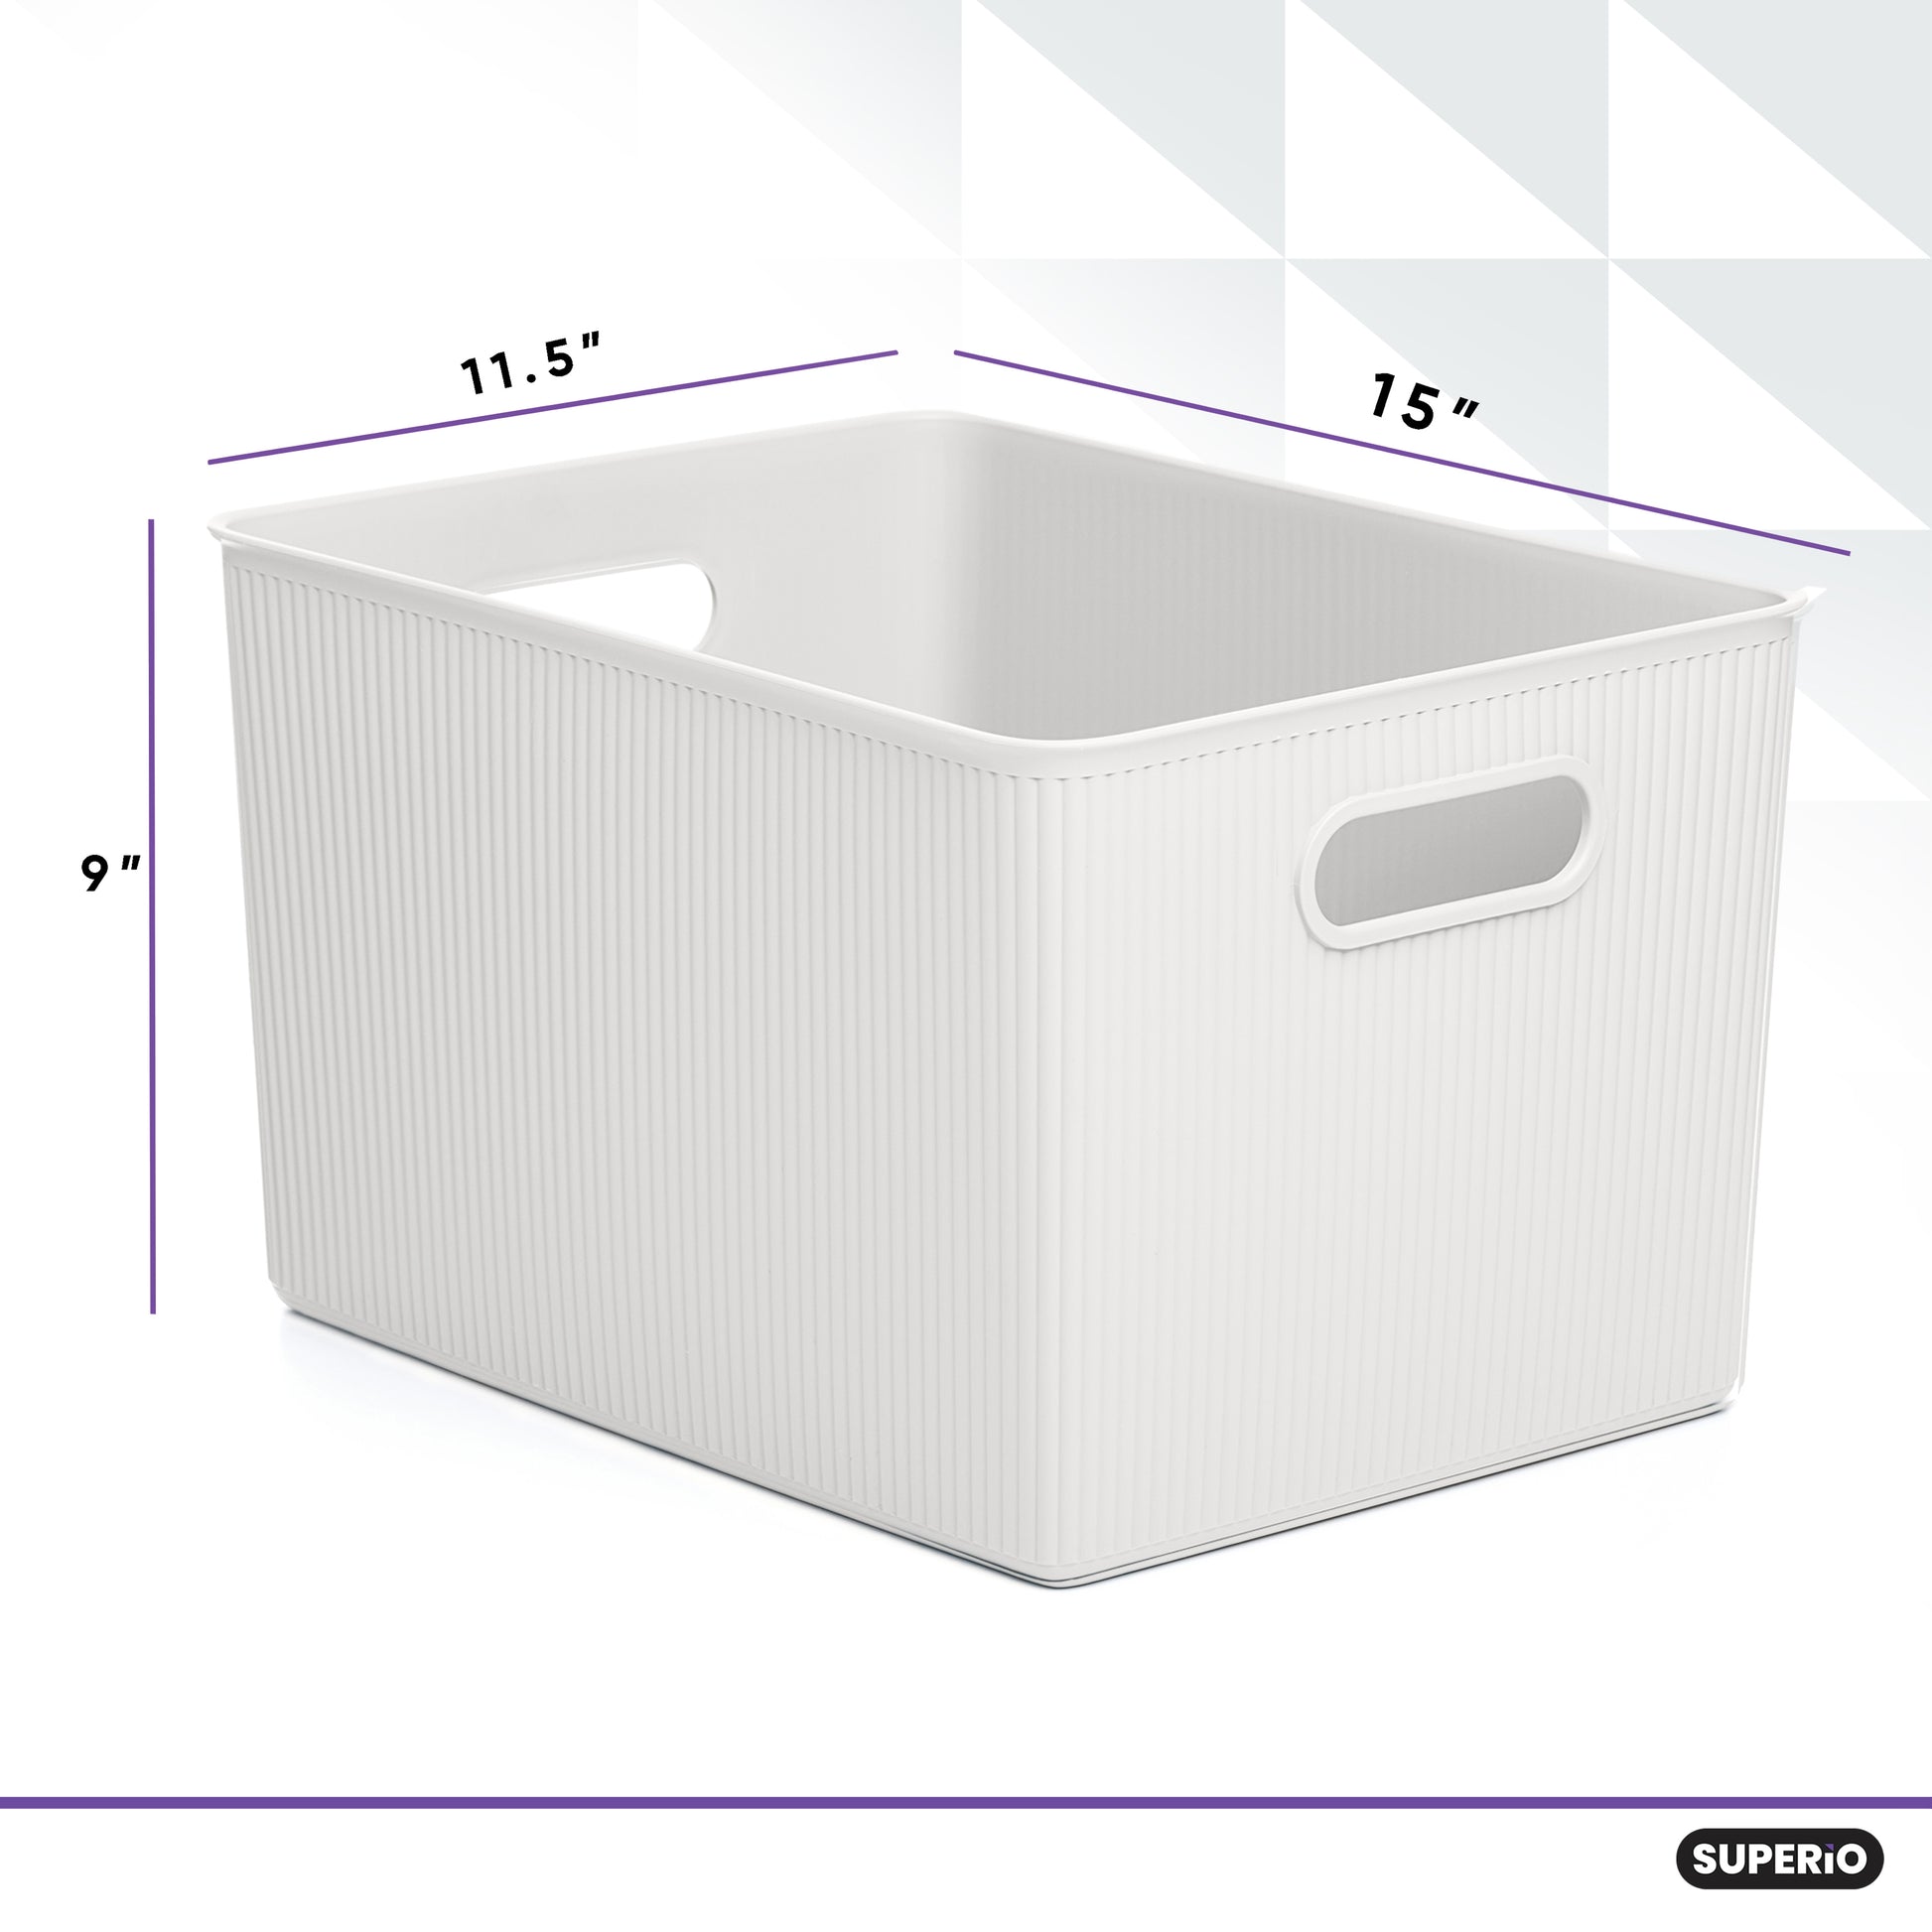 Superio 5L Small Taupe Ribbed Storage Bin with Lid, Plastic Storage Basket